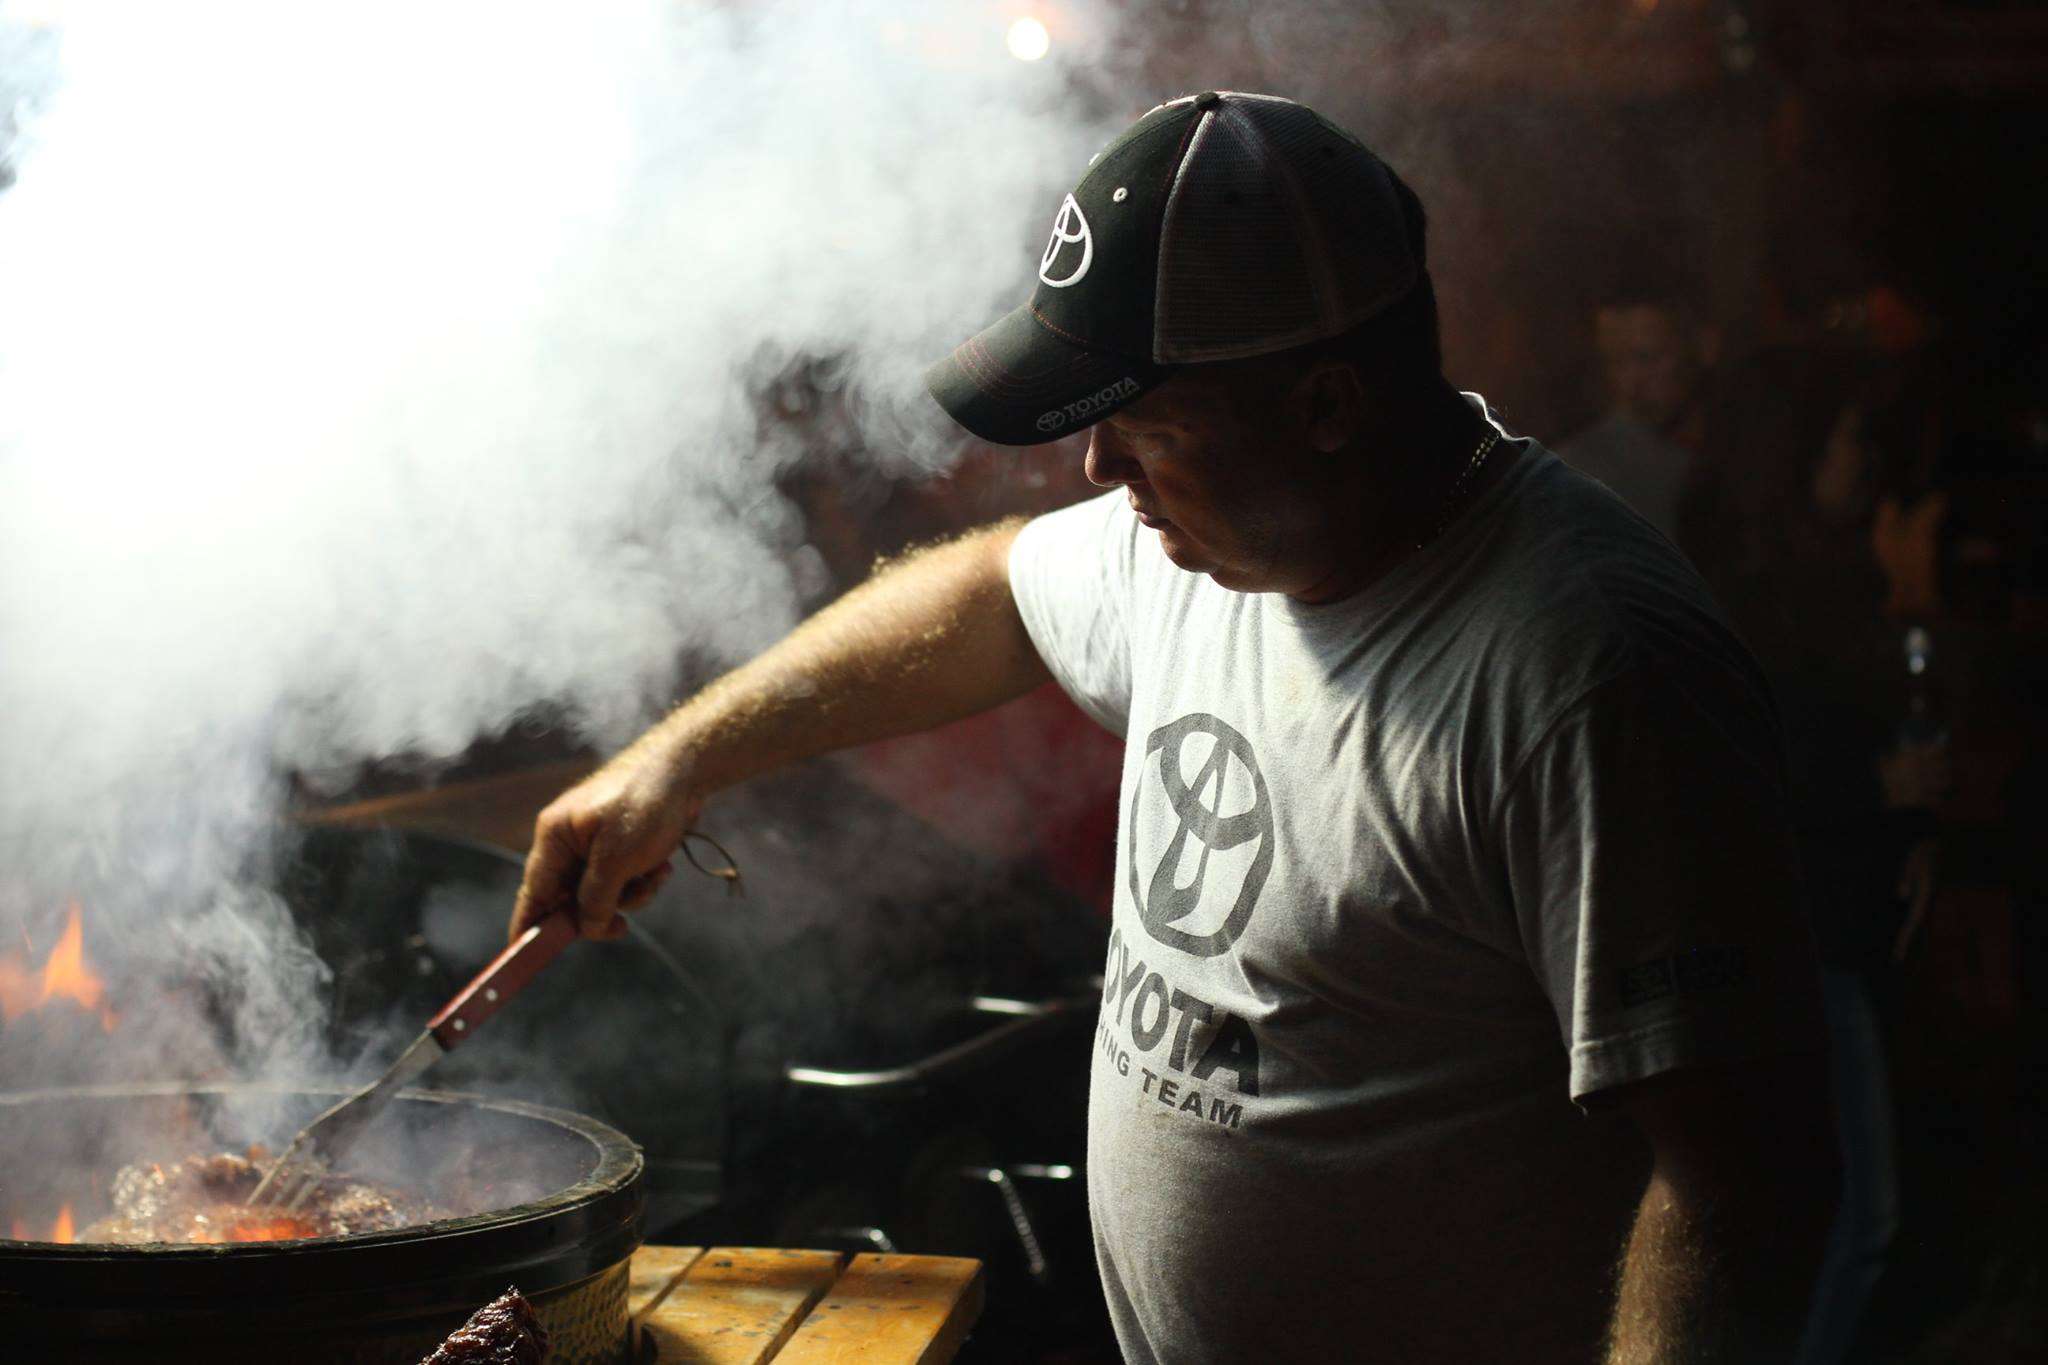 Terry Scroggins cooks up some big ol' steaks at the Toyota USA Owners Event on Kentucky Lake.